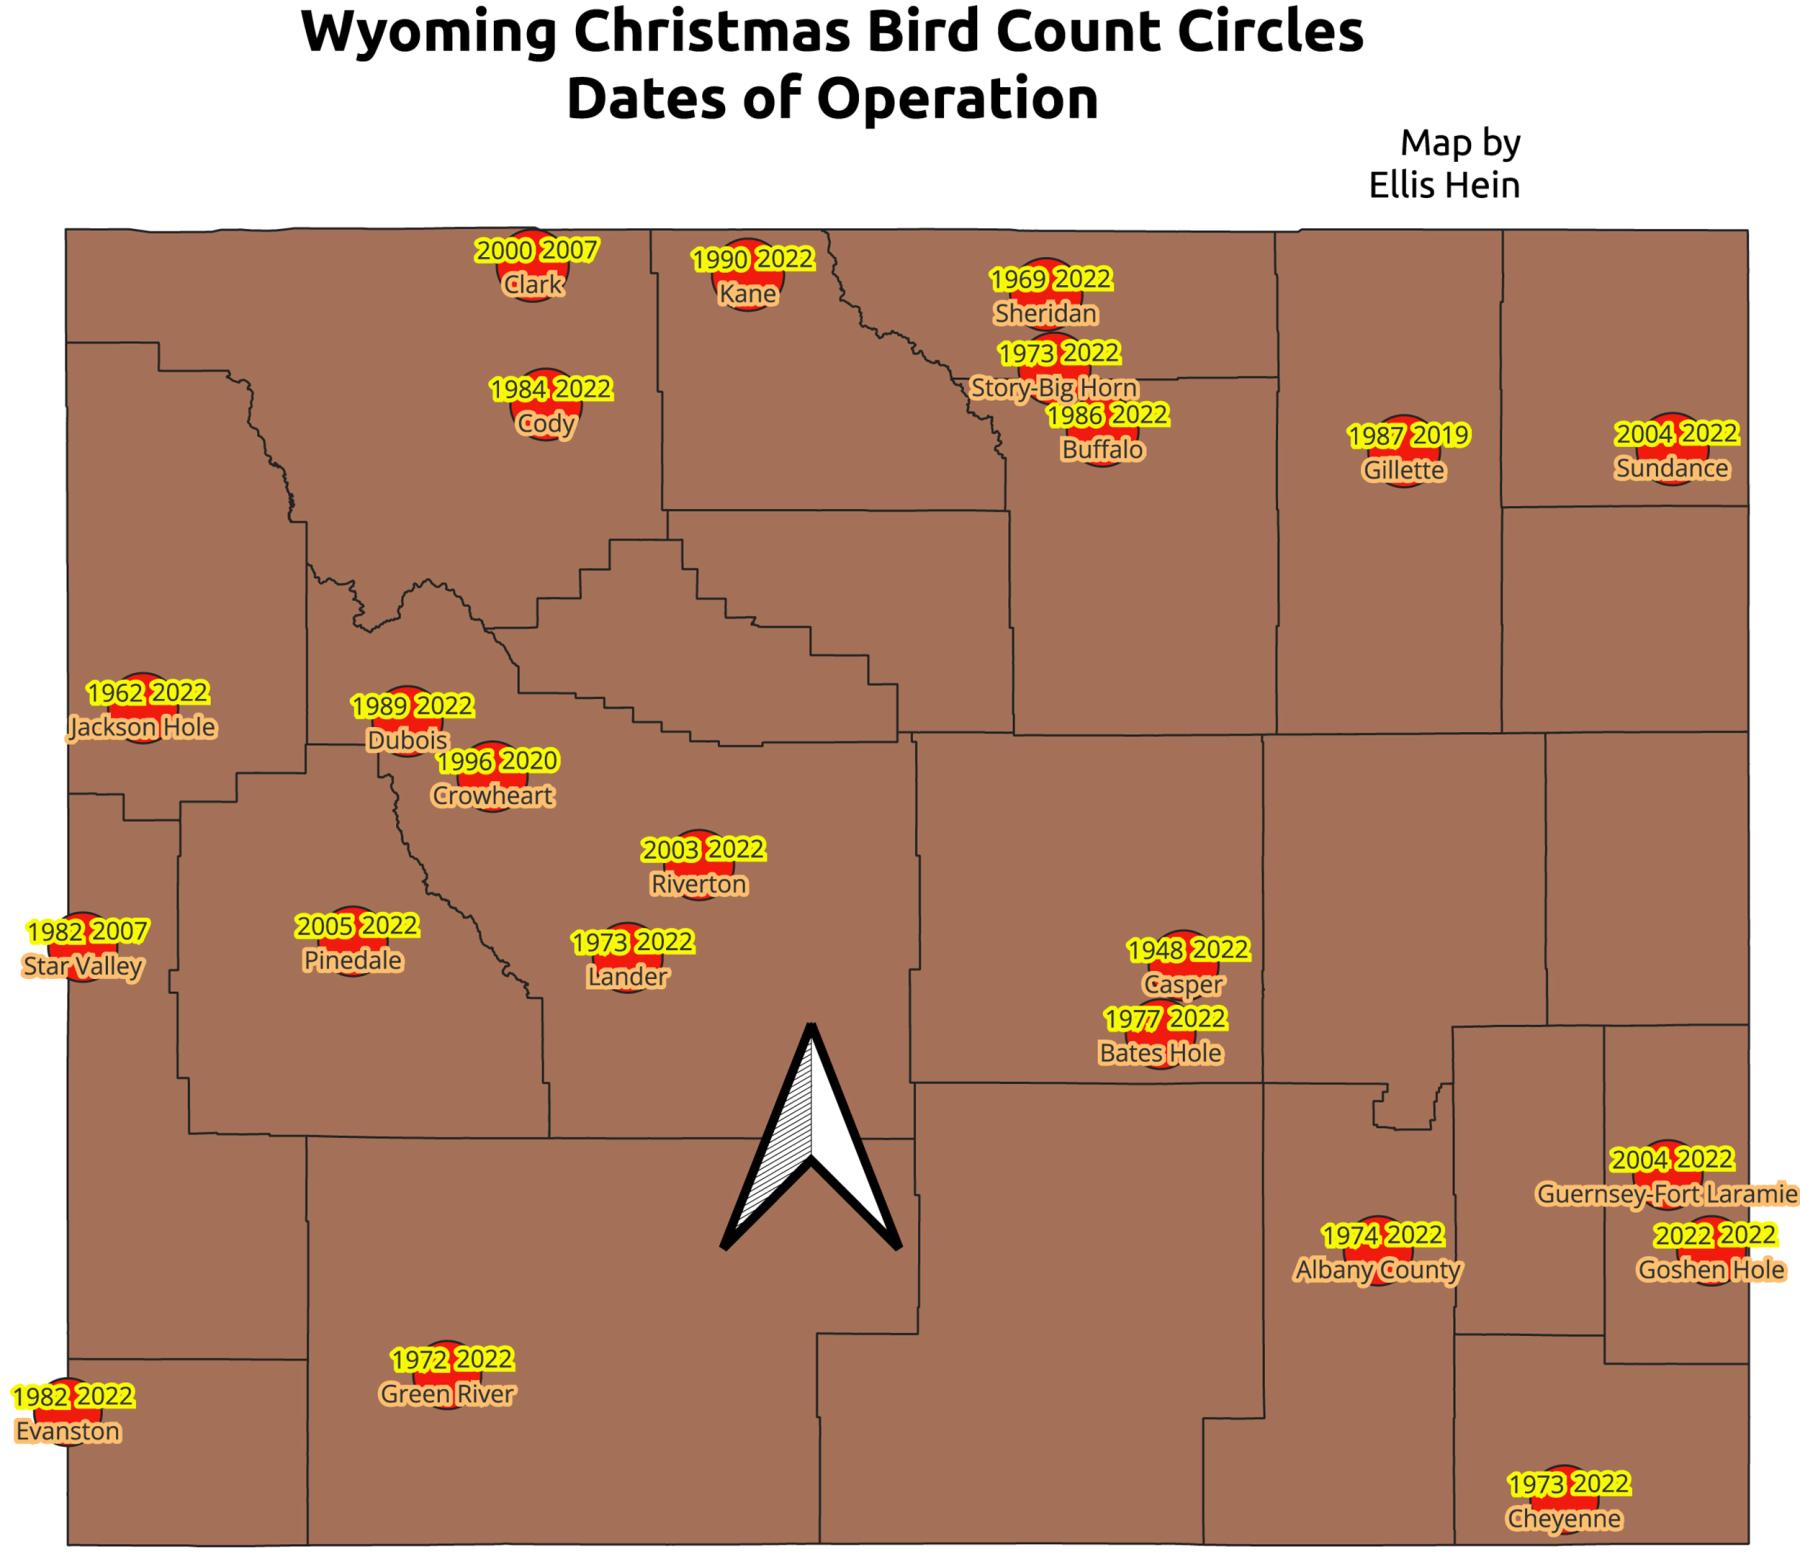 Wyoming birders count birds at Christmastime each year inside 15-mile-radius circles, mapped here, with the dates through 2022 when counts occurred in those circles. Counts usually last one or two days, between December 14 and January 5. Map by author.